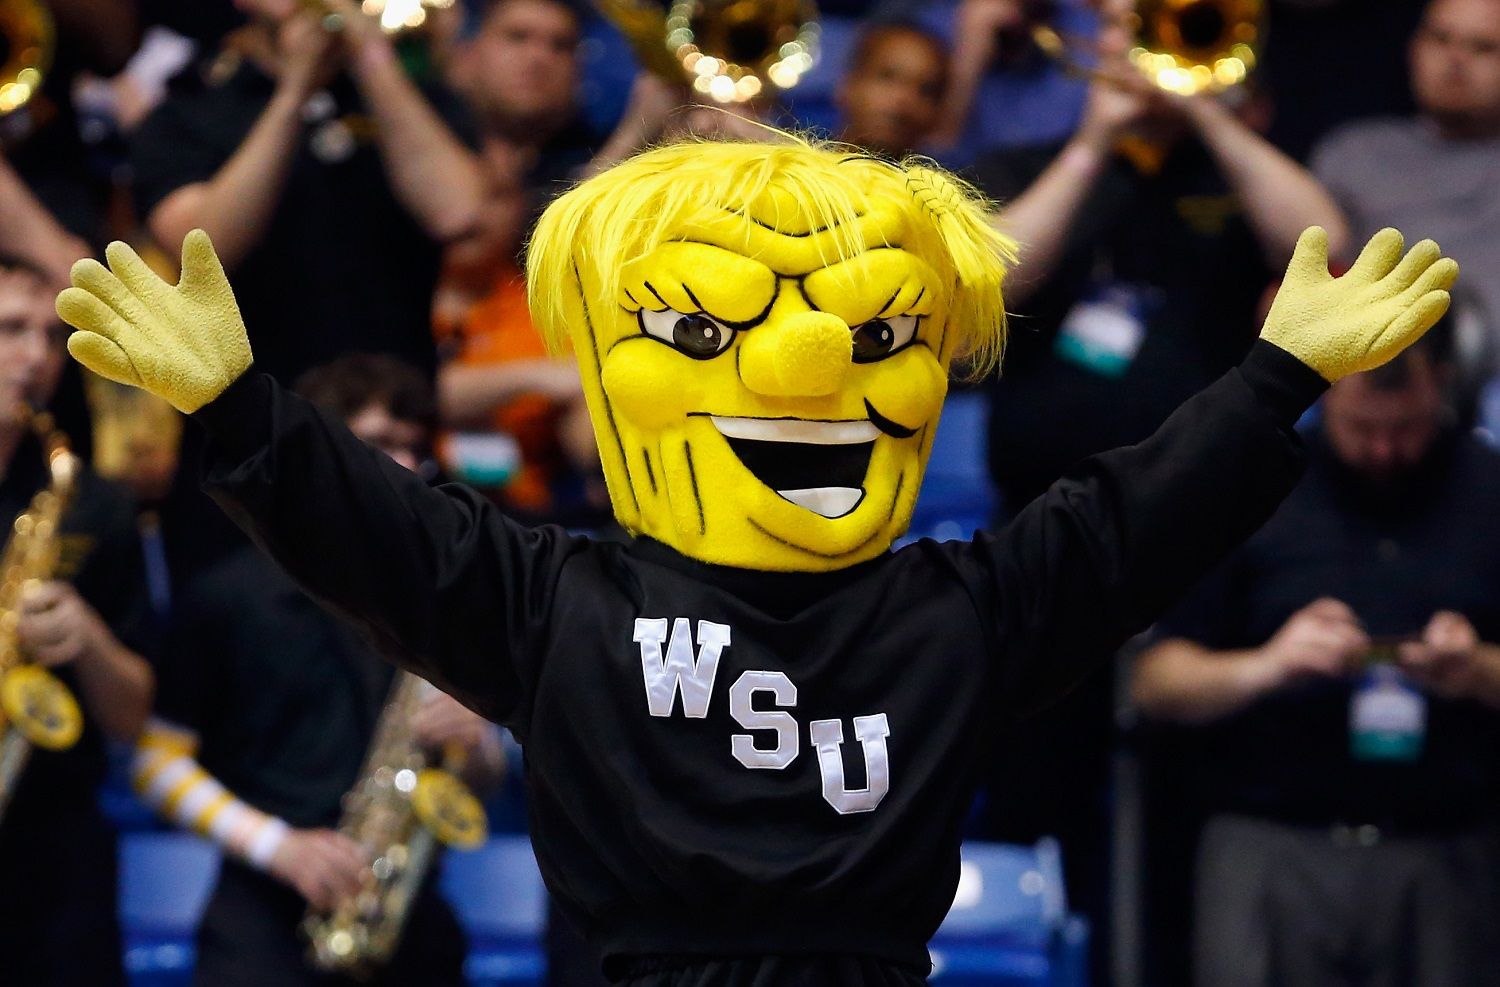 DAYTON, OH - MARCH 15:  The Wichita State Shockers mascot performs during the game between the Wichita State Shockers and the Vanderbilt Commodores in the first round of the 2016 NCAA Men's Basketball Tournament at UD Arena on March 15, 2016 in Dayton, Ohio.  (Photo by Gregory Shamus/Getty Images)